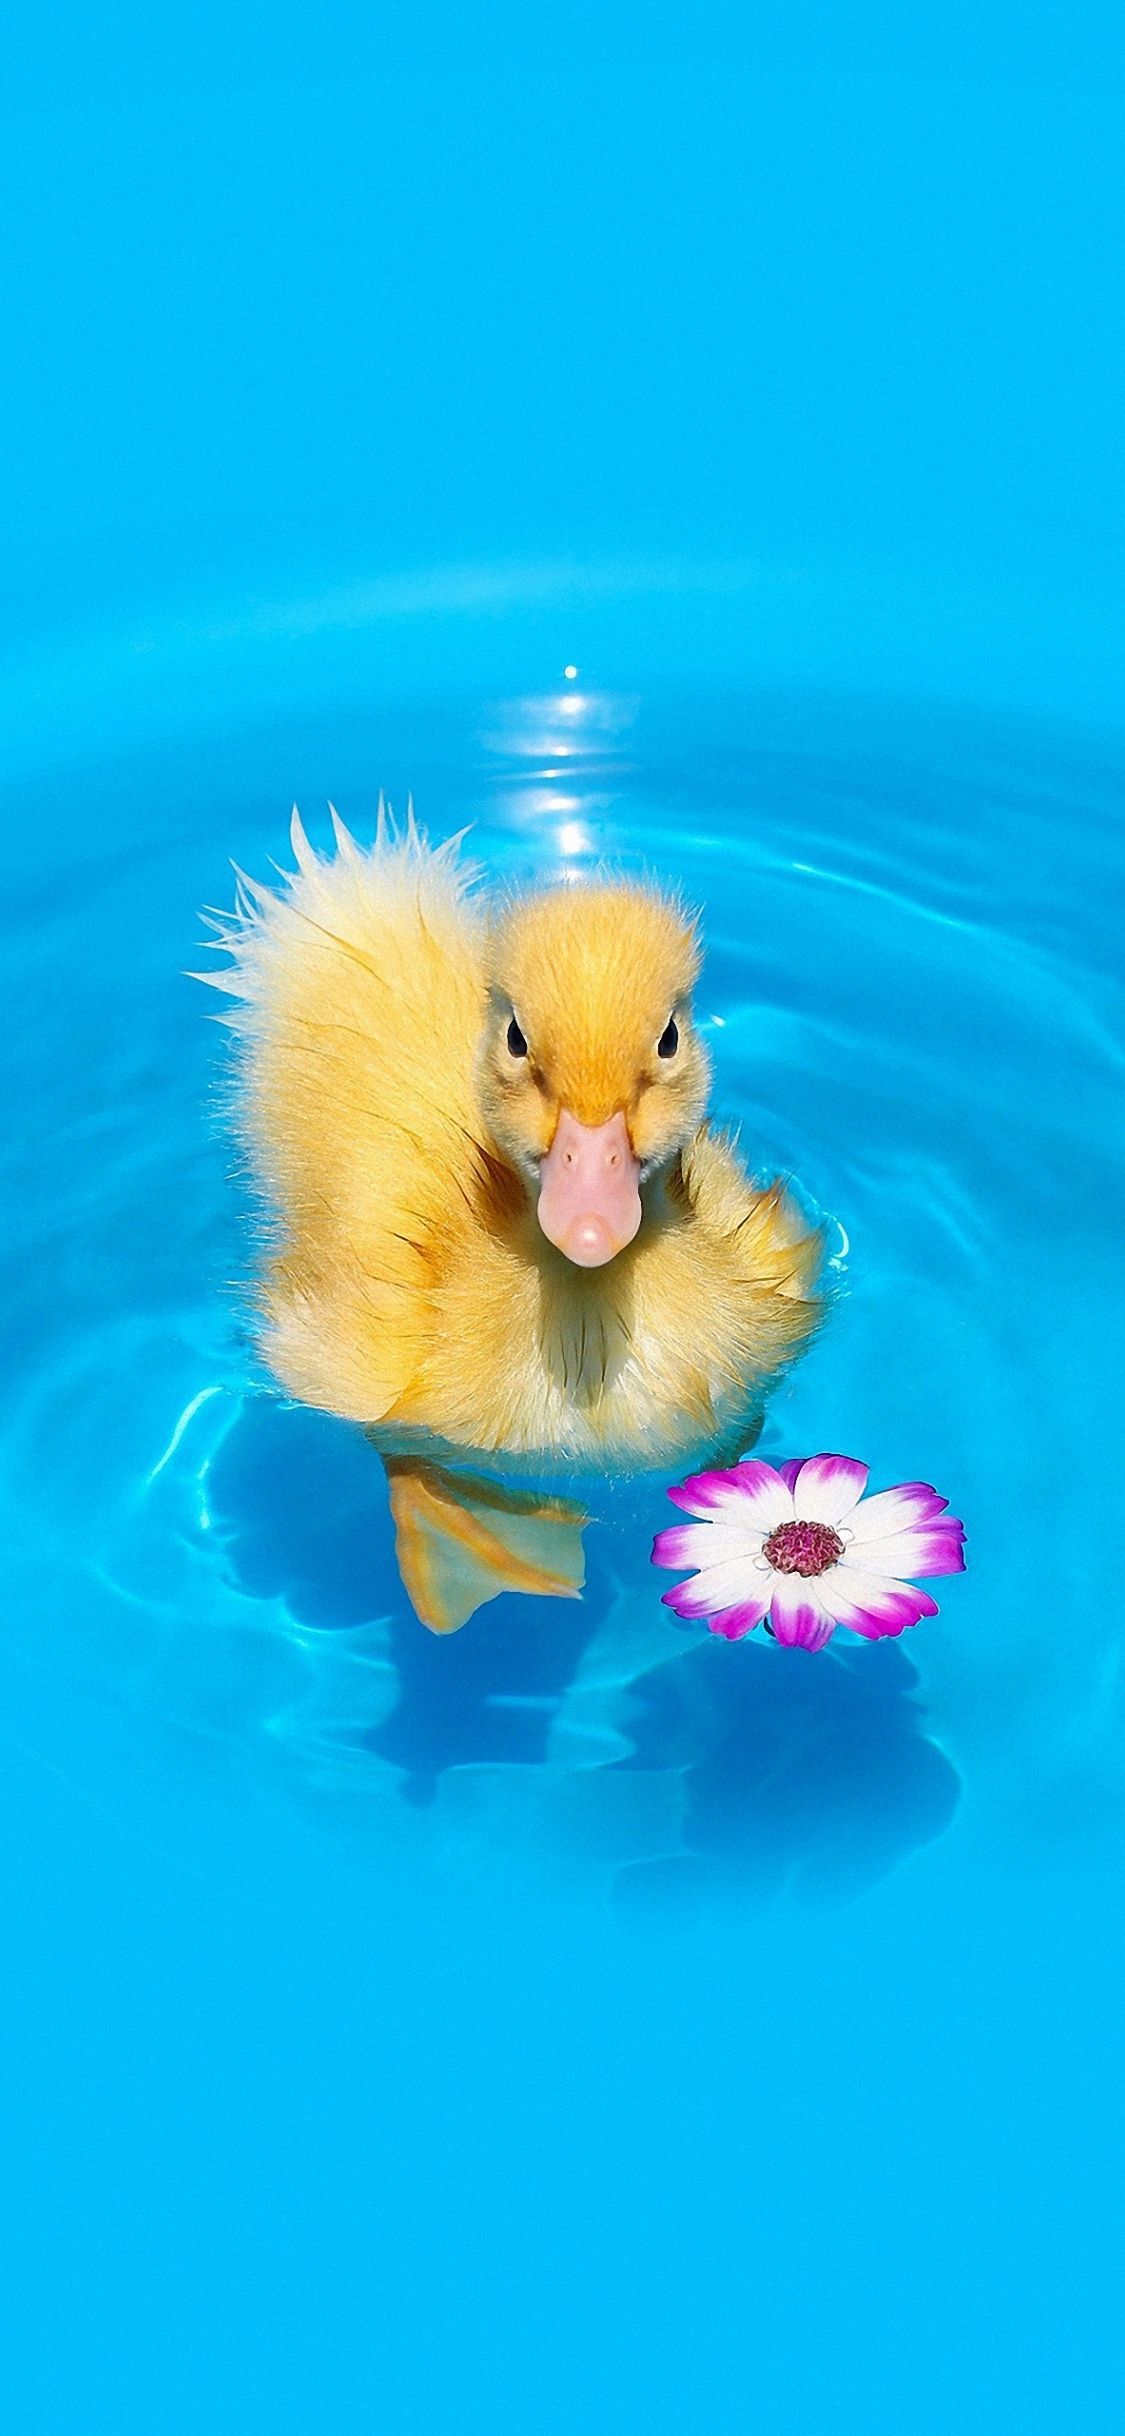 A yellow duck floating in the water with flowers - Duck